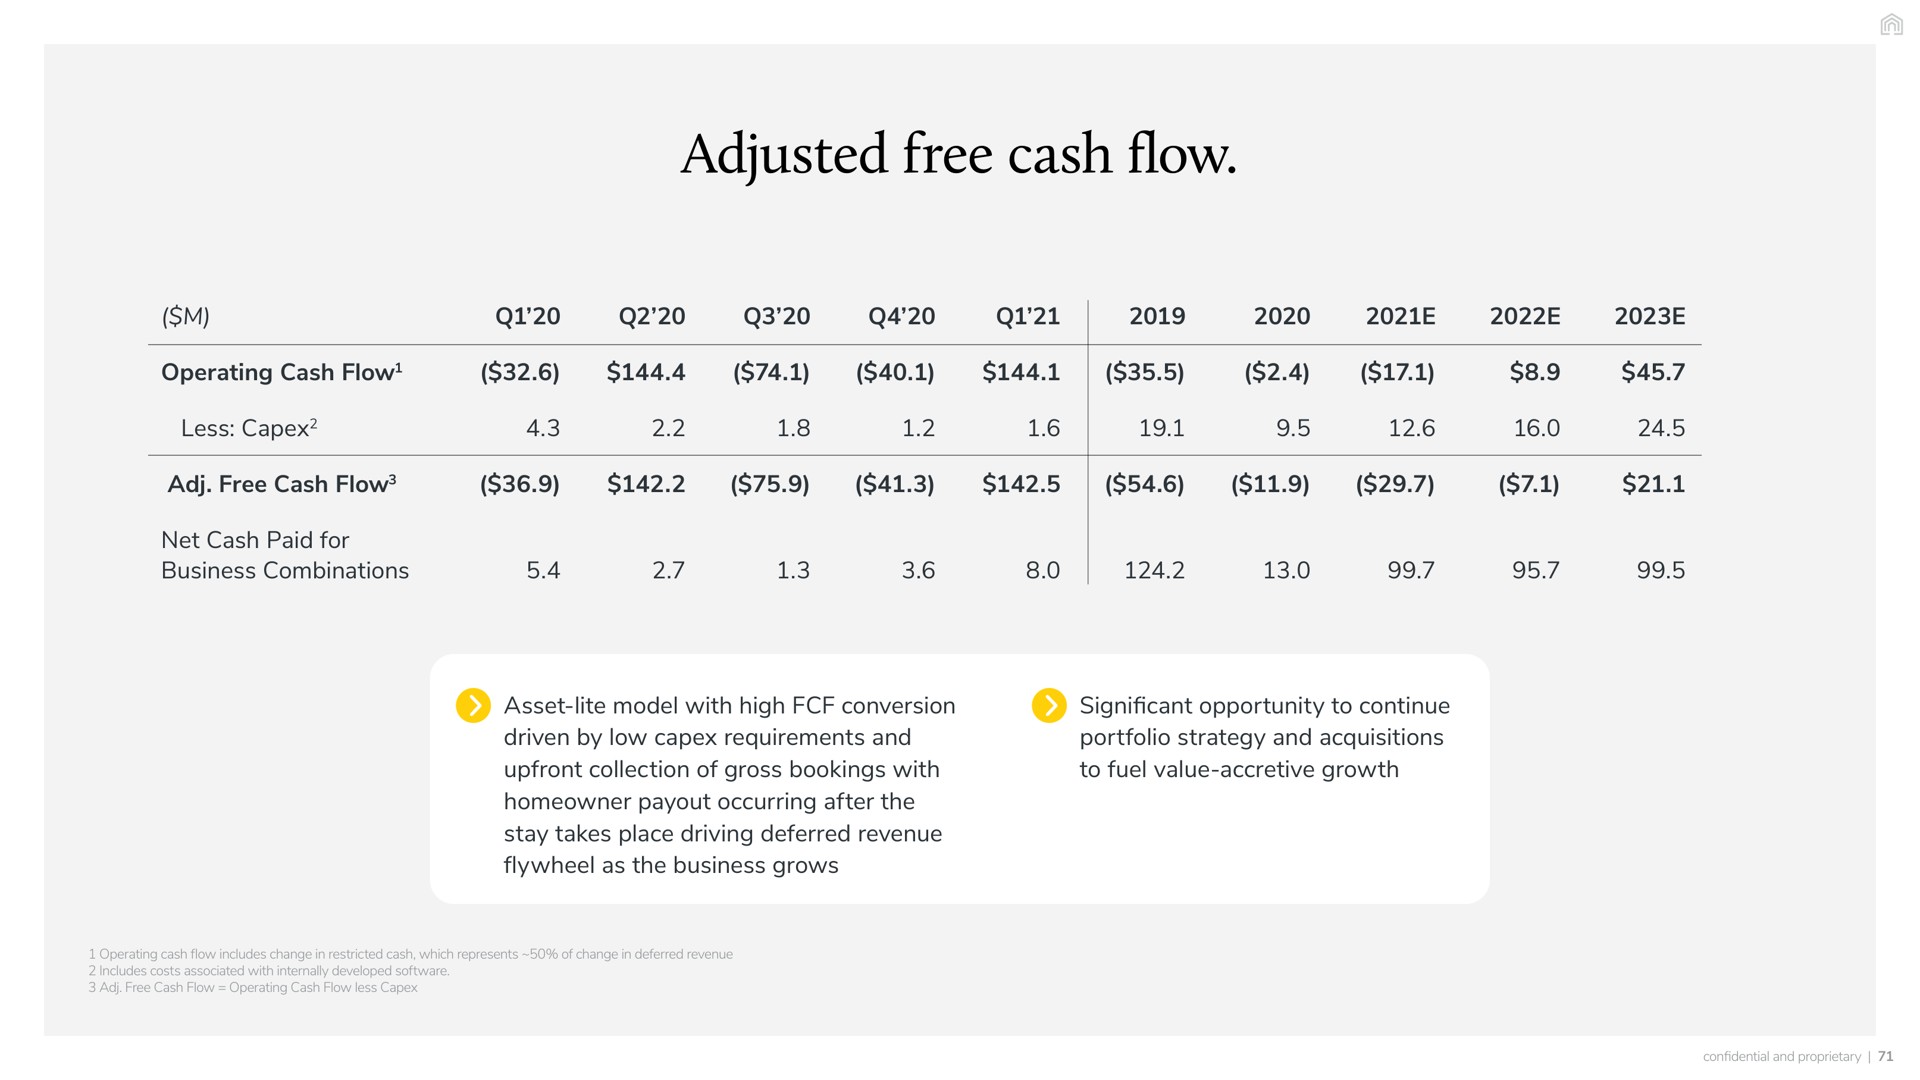 adjusted free cash flow operating less net paid for business combinations a asset lite model with high conversion driven by low requirements and collection of gross bookings with homeowner occurring after the stay takes place driving deferred revenue flywheel as the business grows significant opportunity to continue portfolio strategy and acquisitions to fuel value accretive growth | Vacasa